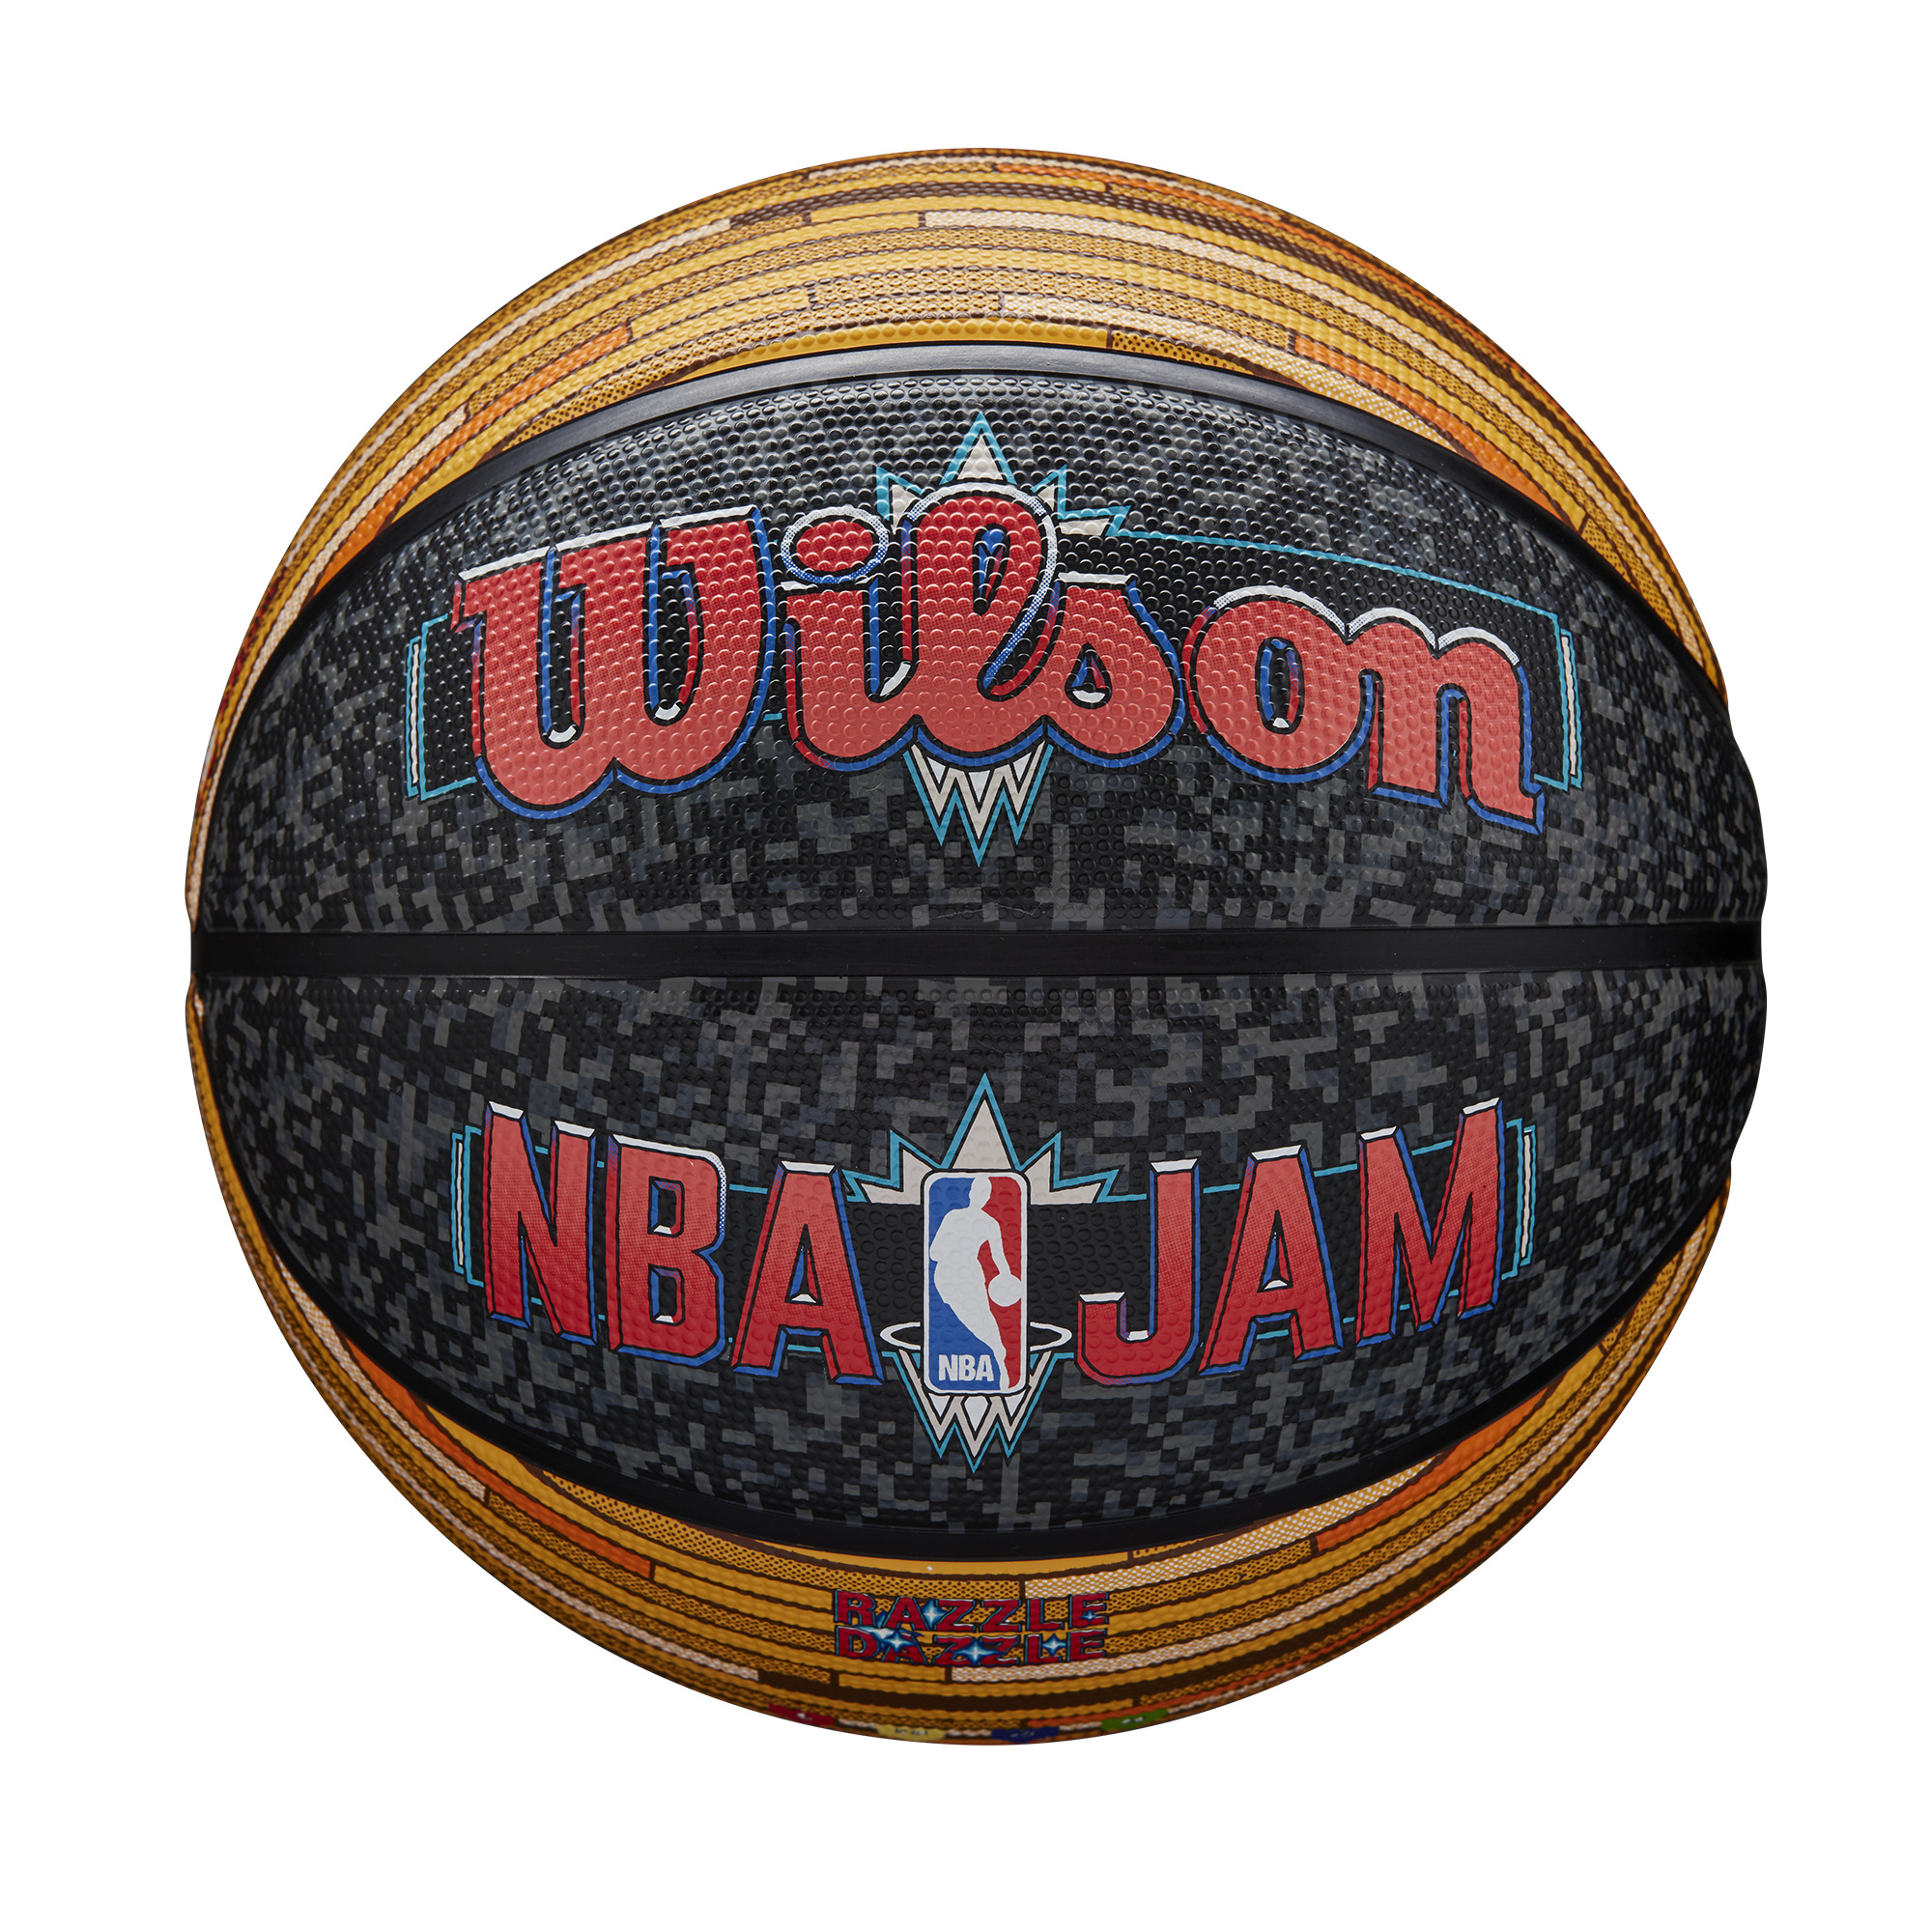 WZ3013801ID_0_7_NBA_JAM_OUTDOOR_BSKT_295_BL_GY_RD_BU_YE_BR.png.high-res